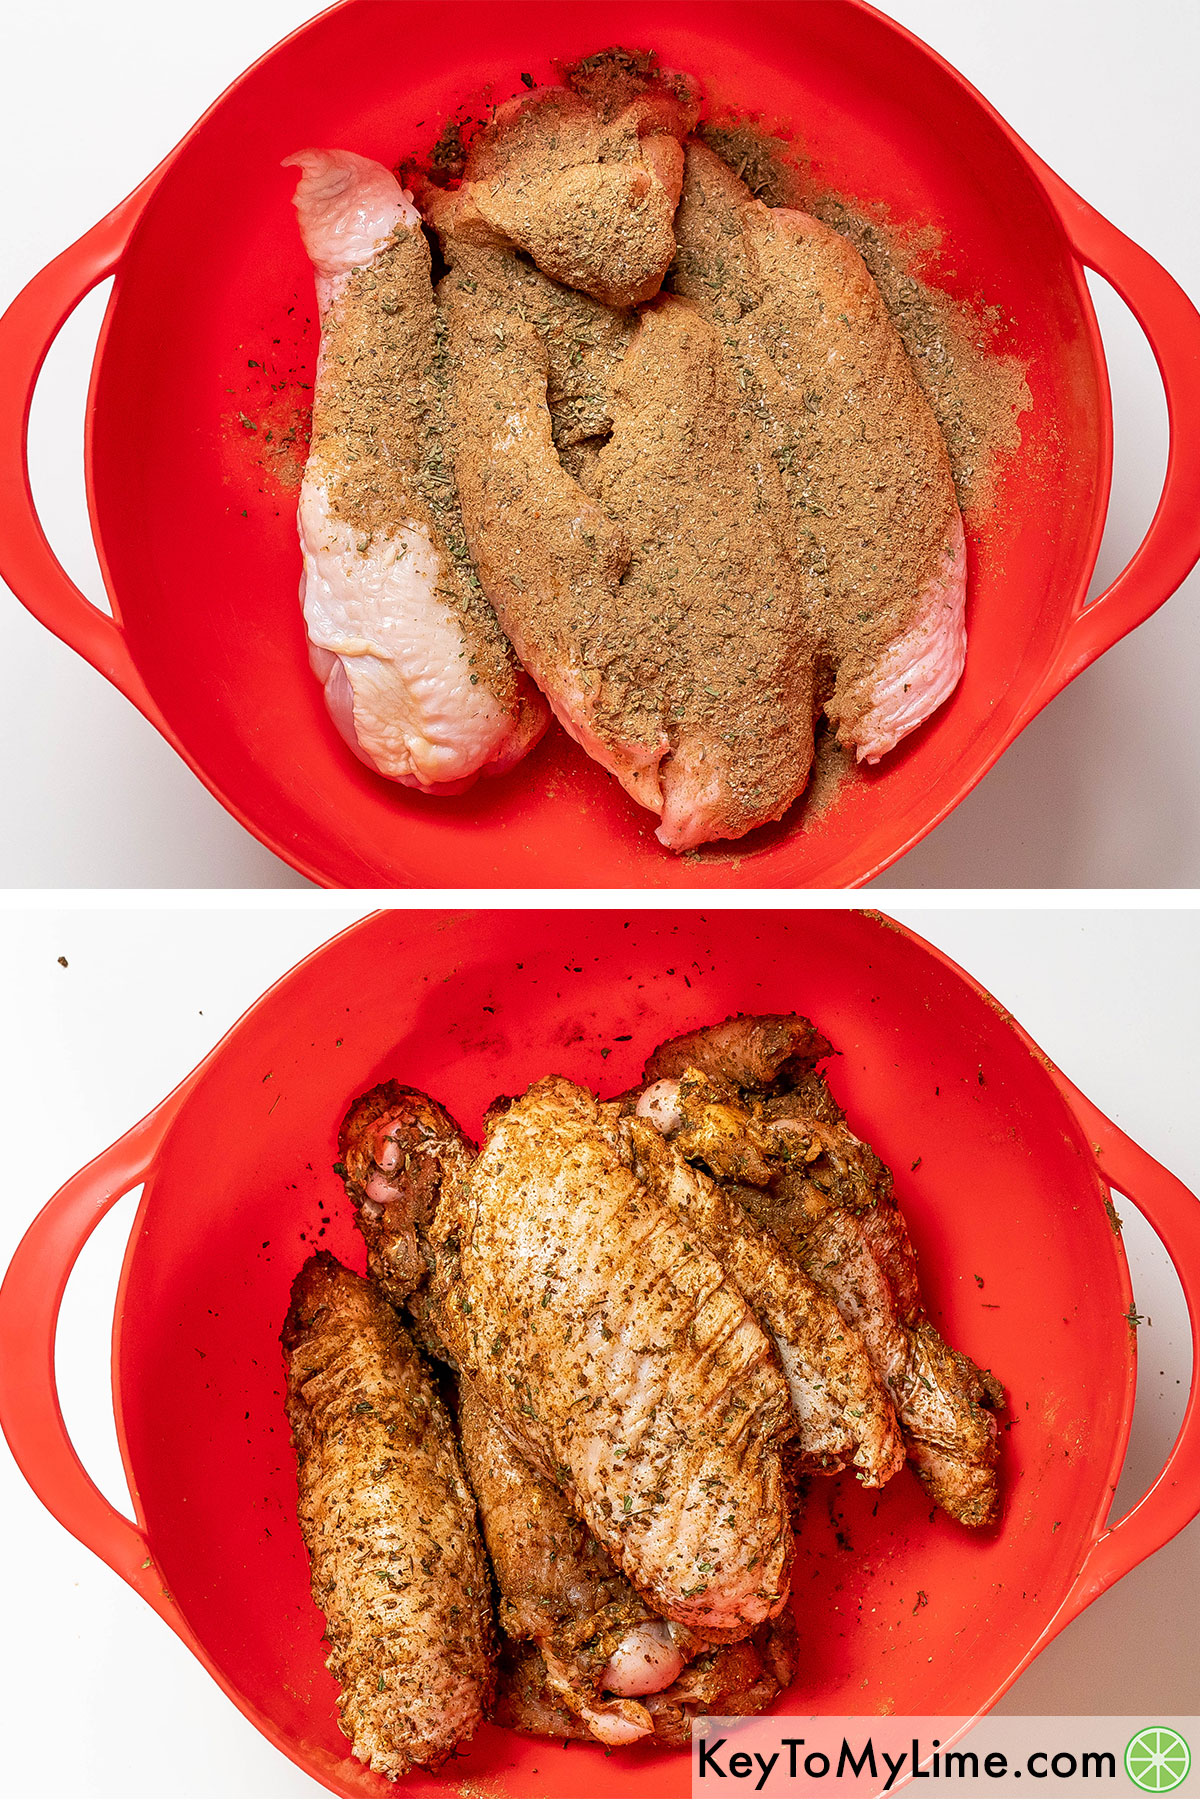 Adding the dry rub ingredients to the top of the oiled turkey wings, and then mixing until fully coated.